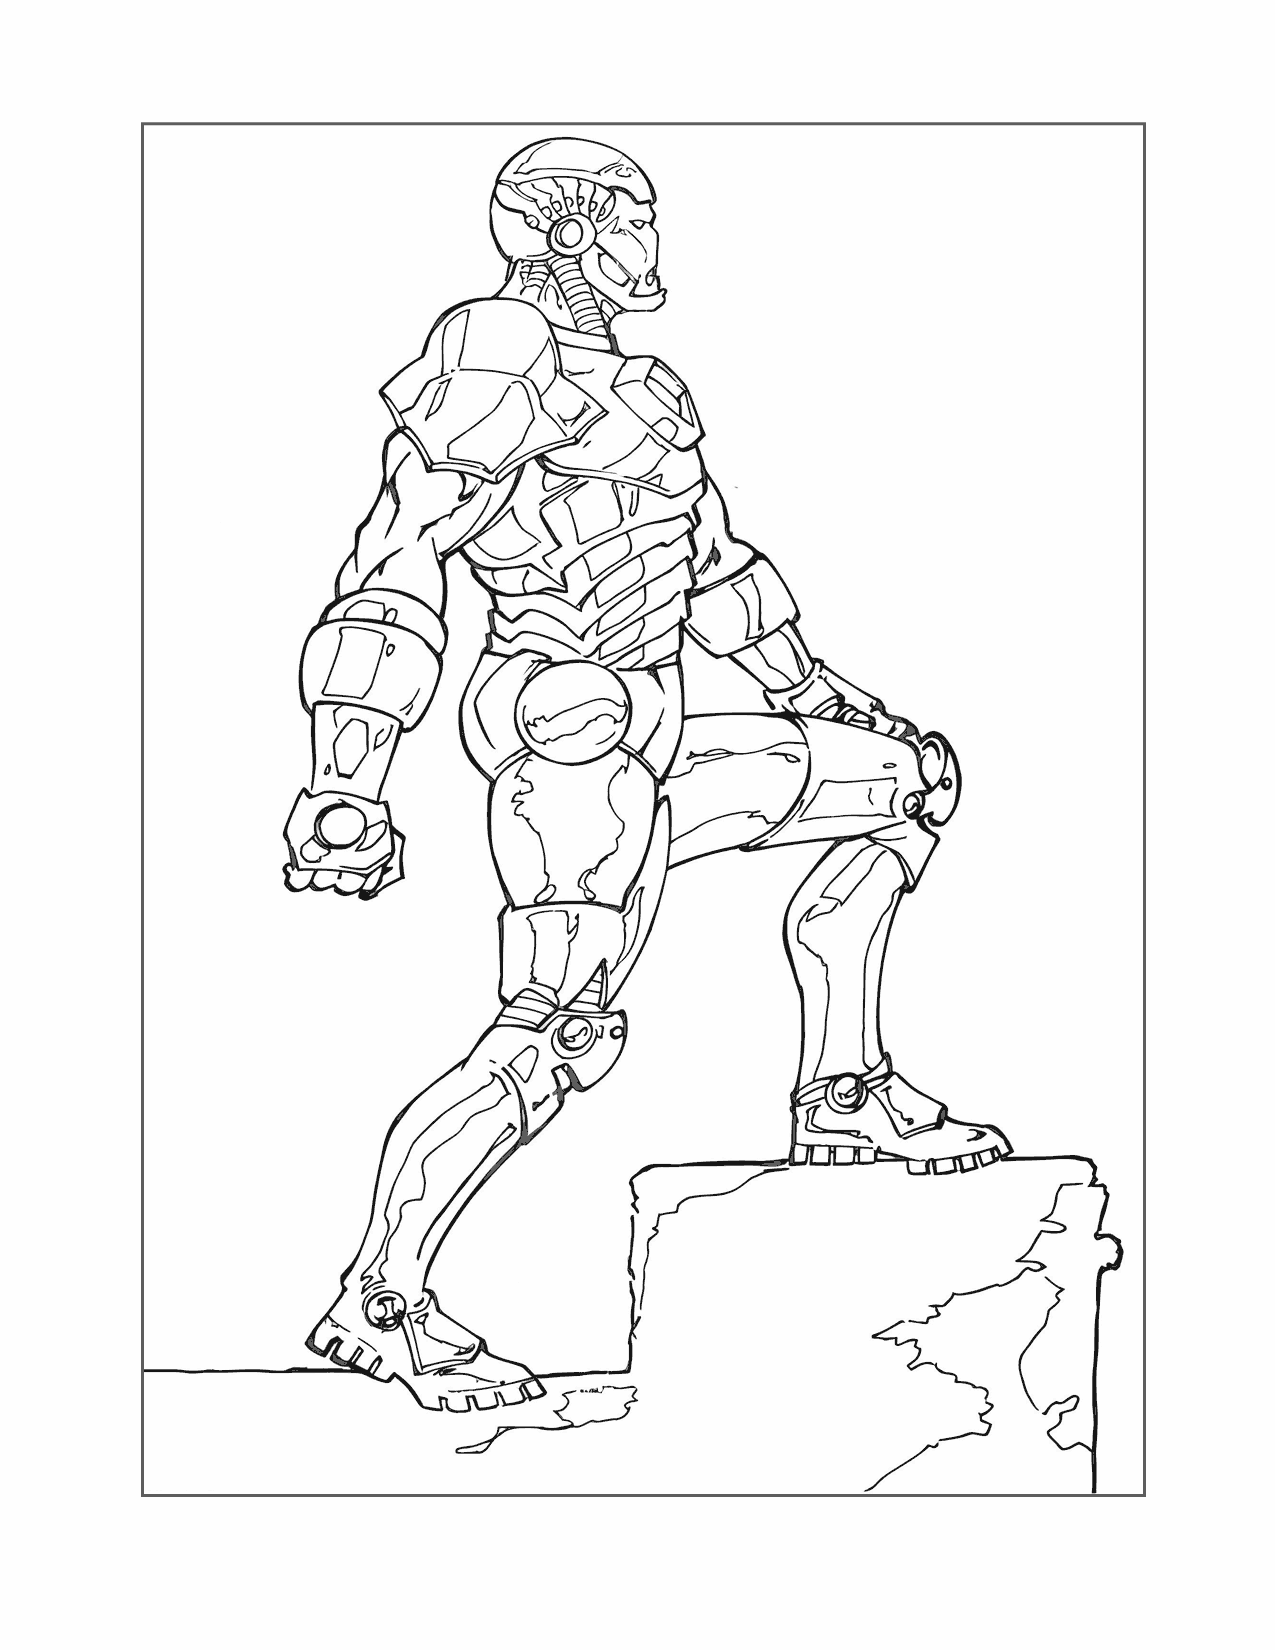 Strong Iron Man Coloring Page